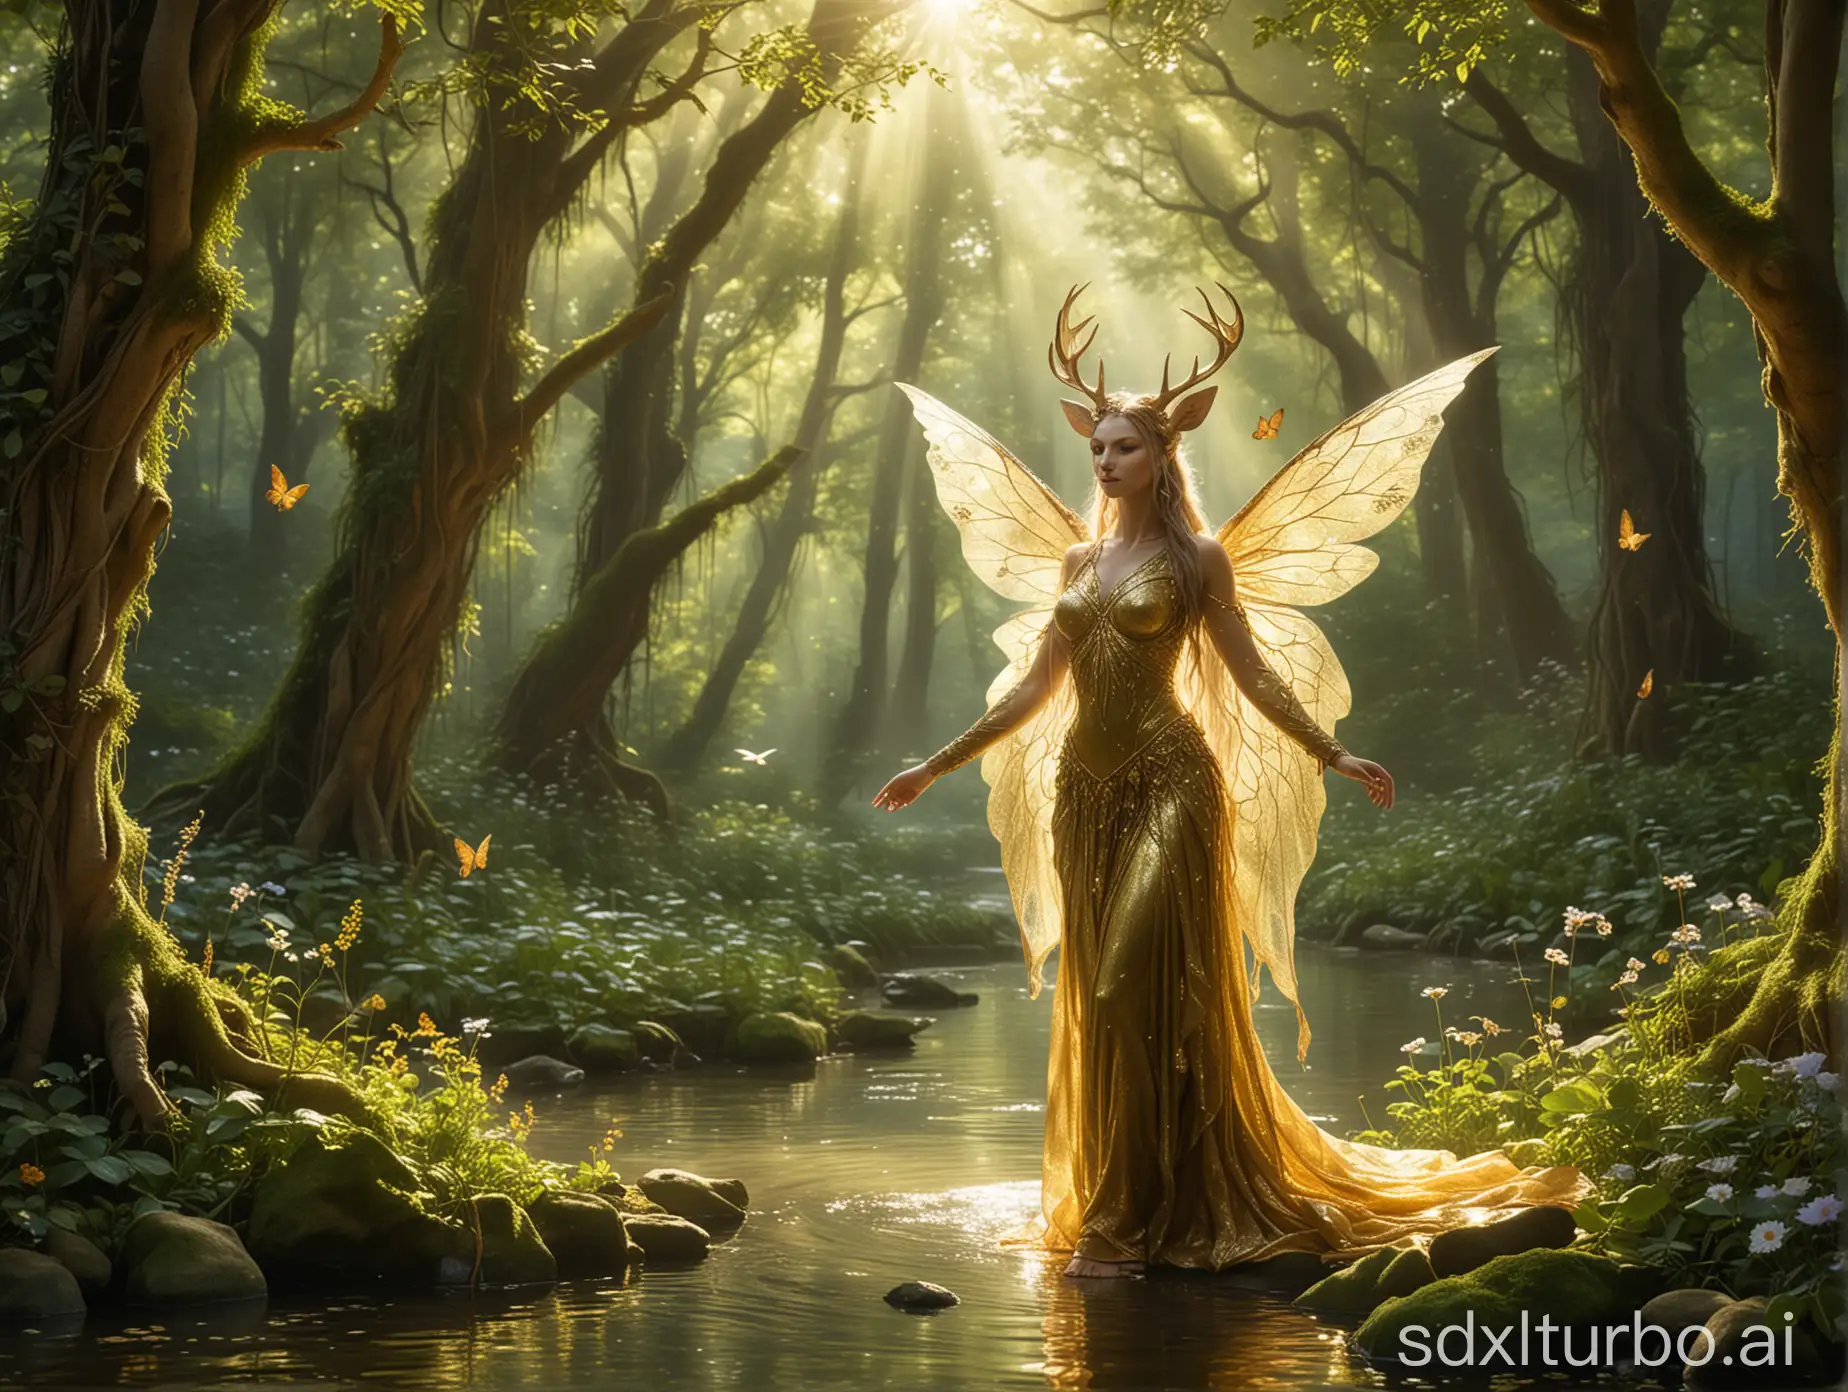 Depict a forest spirit living a tranquil life in the verdant and mystical ancient forest. Sunlight filters through the towering canopy, casting golden dappled shadows. The spirit has pointed ears and iridescent transparent wings, dressed in natural attire woven from leaves and vines, adorned with seasonal wildflowers. She dances gracefully beneath the ancient trees, surrounded by a babbling brook and a rich array of wildlife, such as deer and birds. The entire scene is enveloped in a soft magical aura, creating a dreamlike atmosphere of peace and harmony.